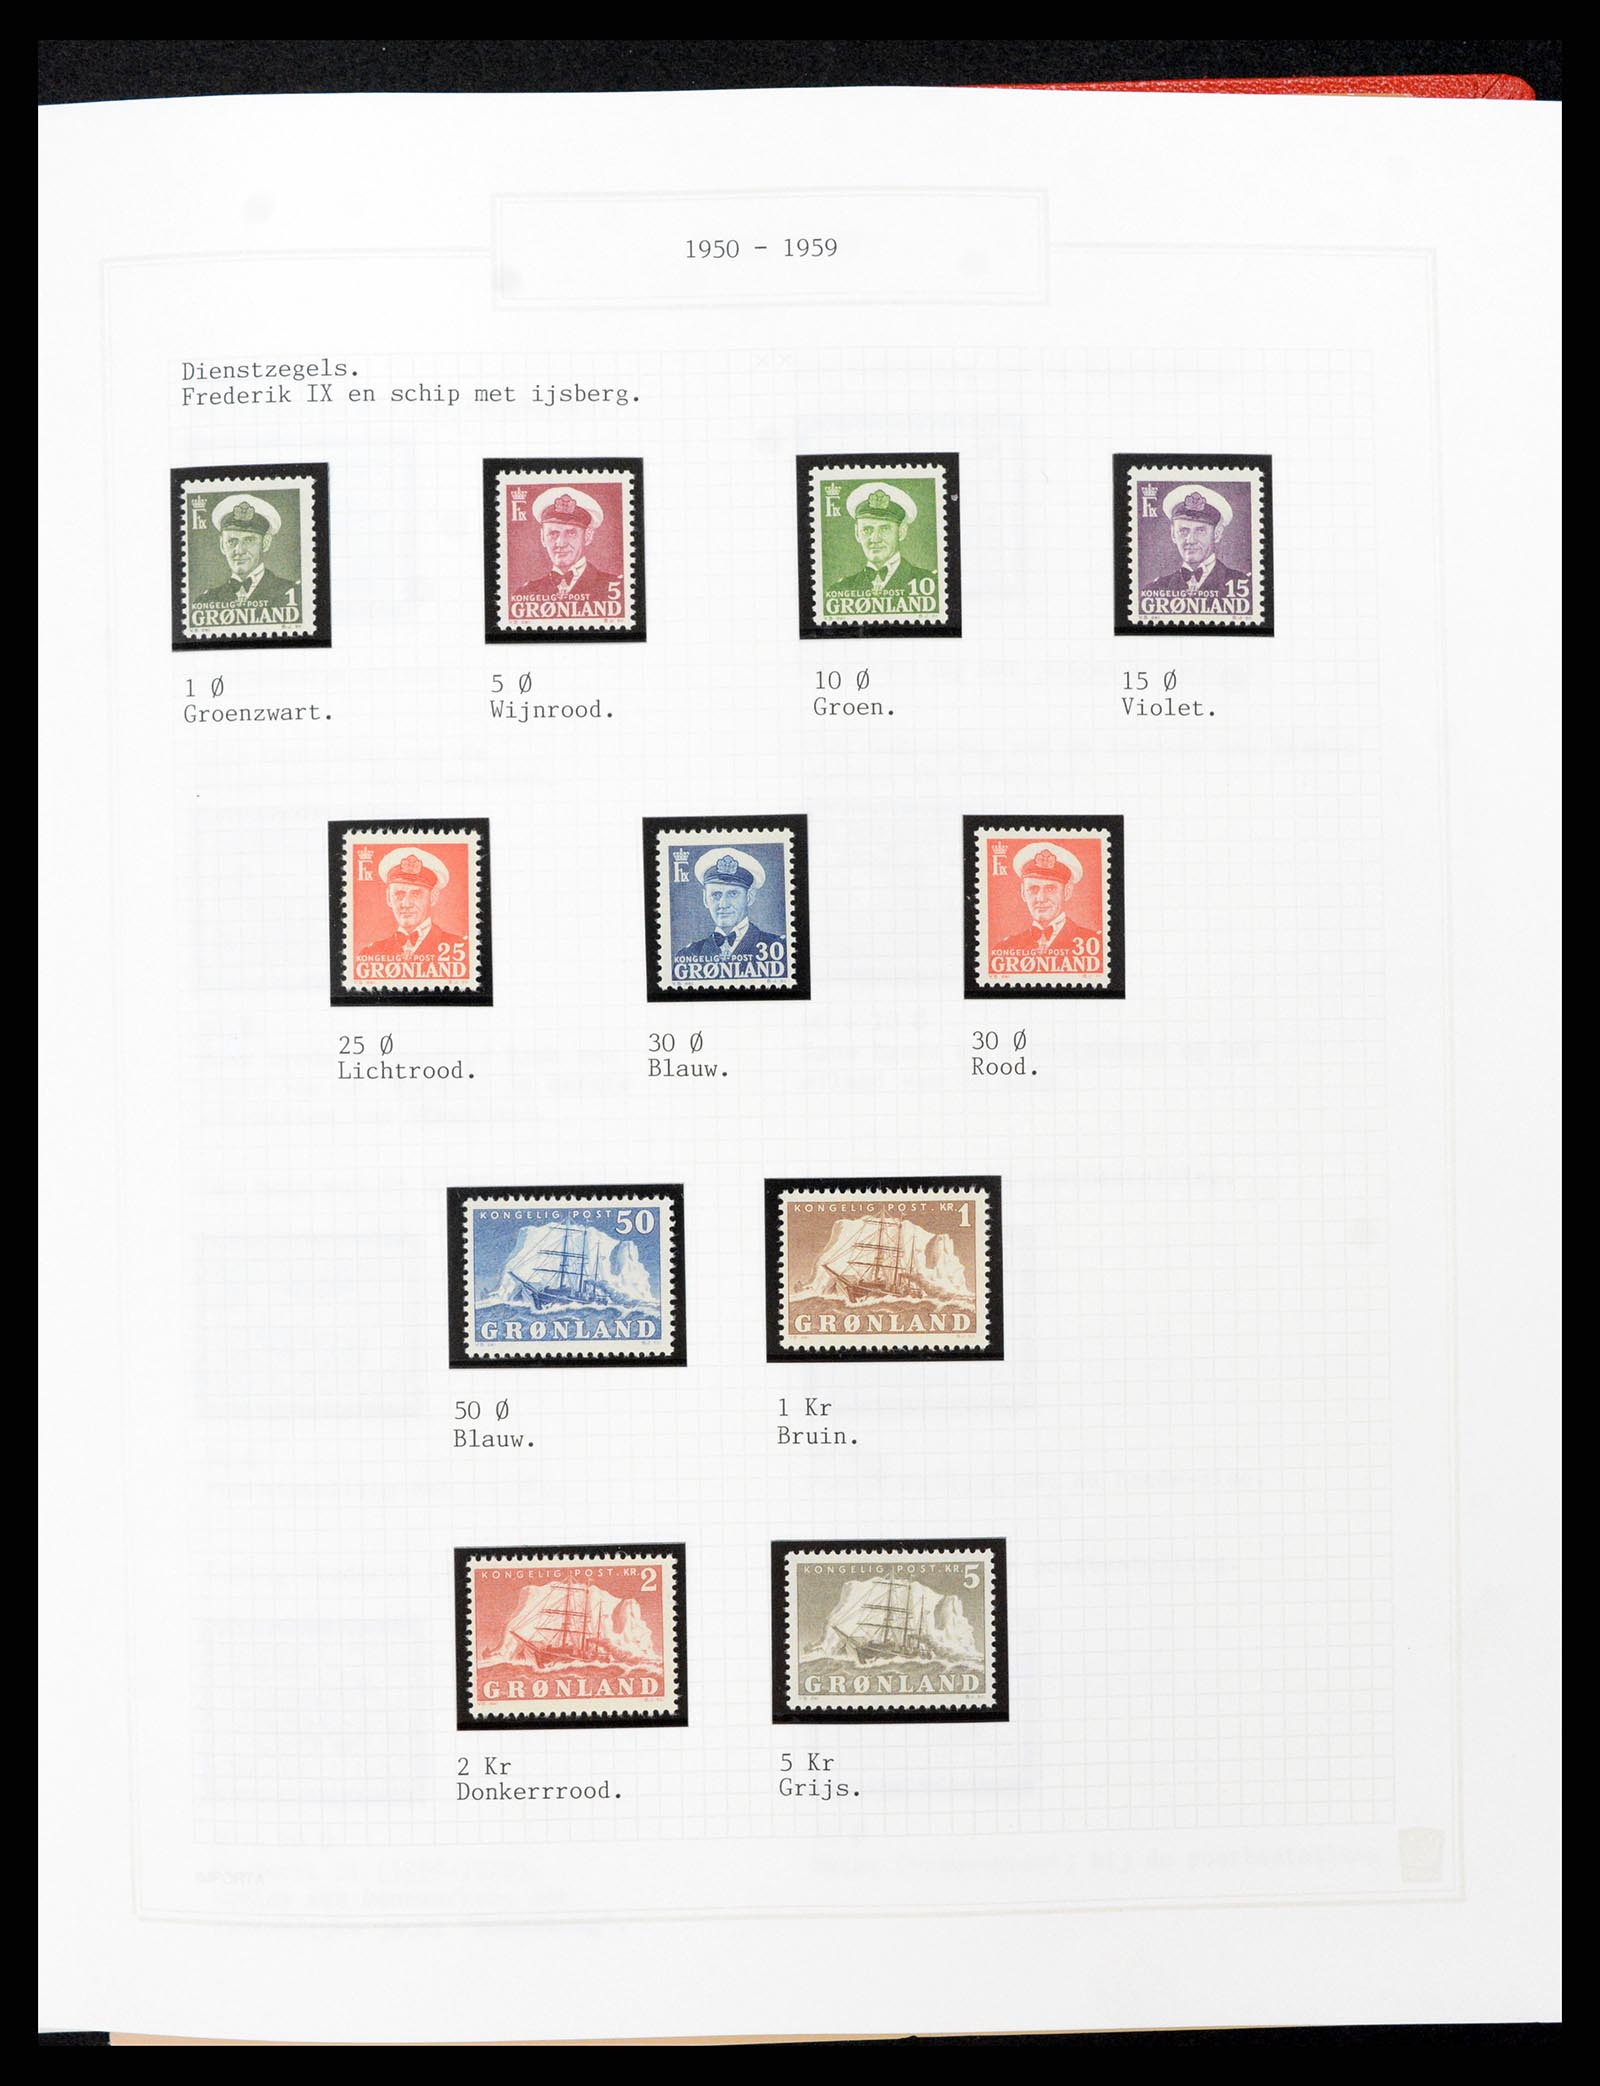 37302 059 - Stamp collection 37302 Greenland and Faroe Islands 1905-2001.